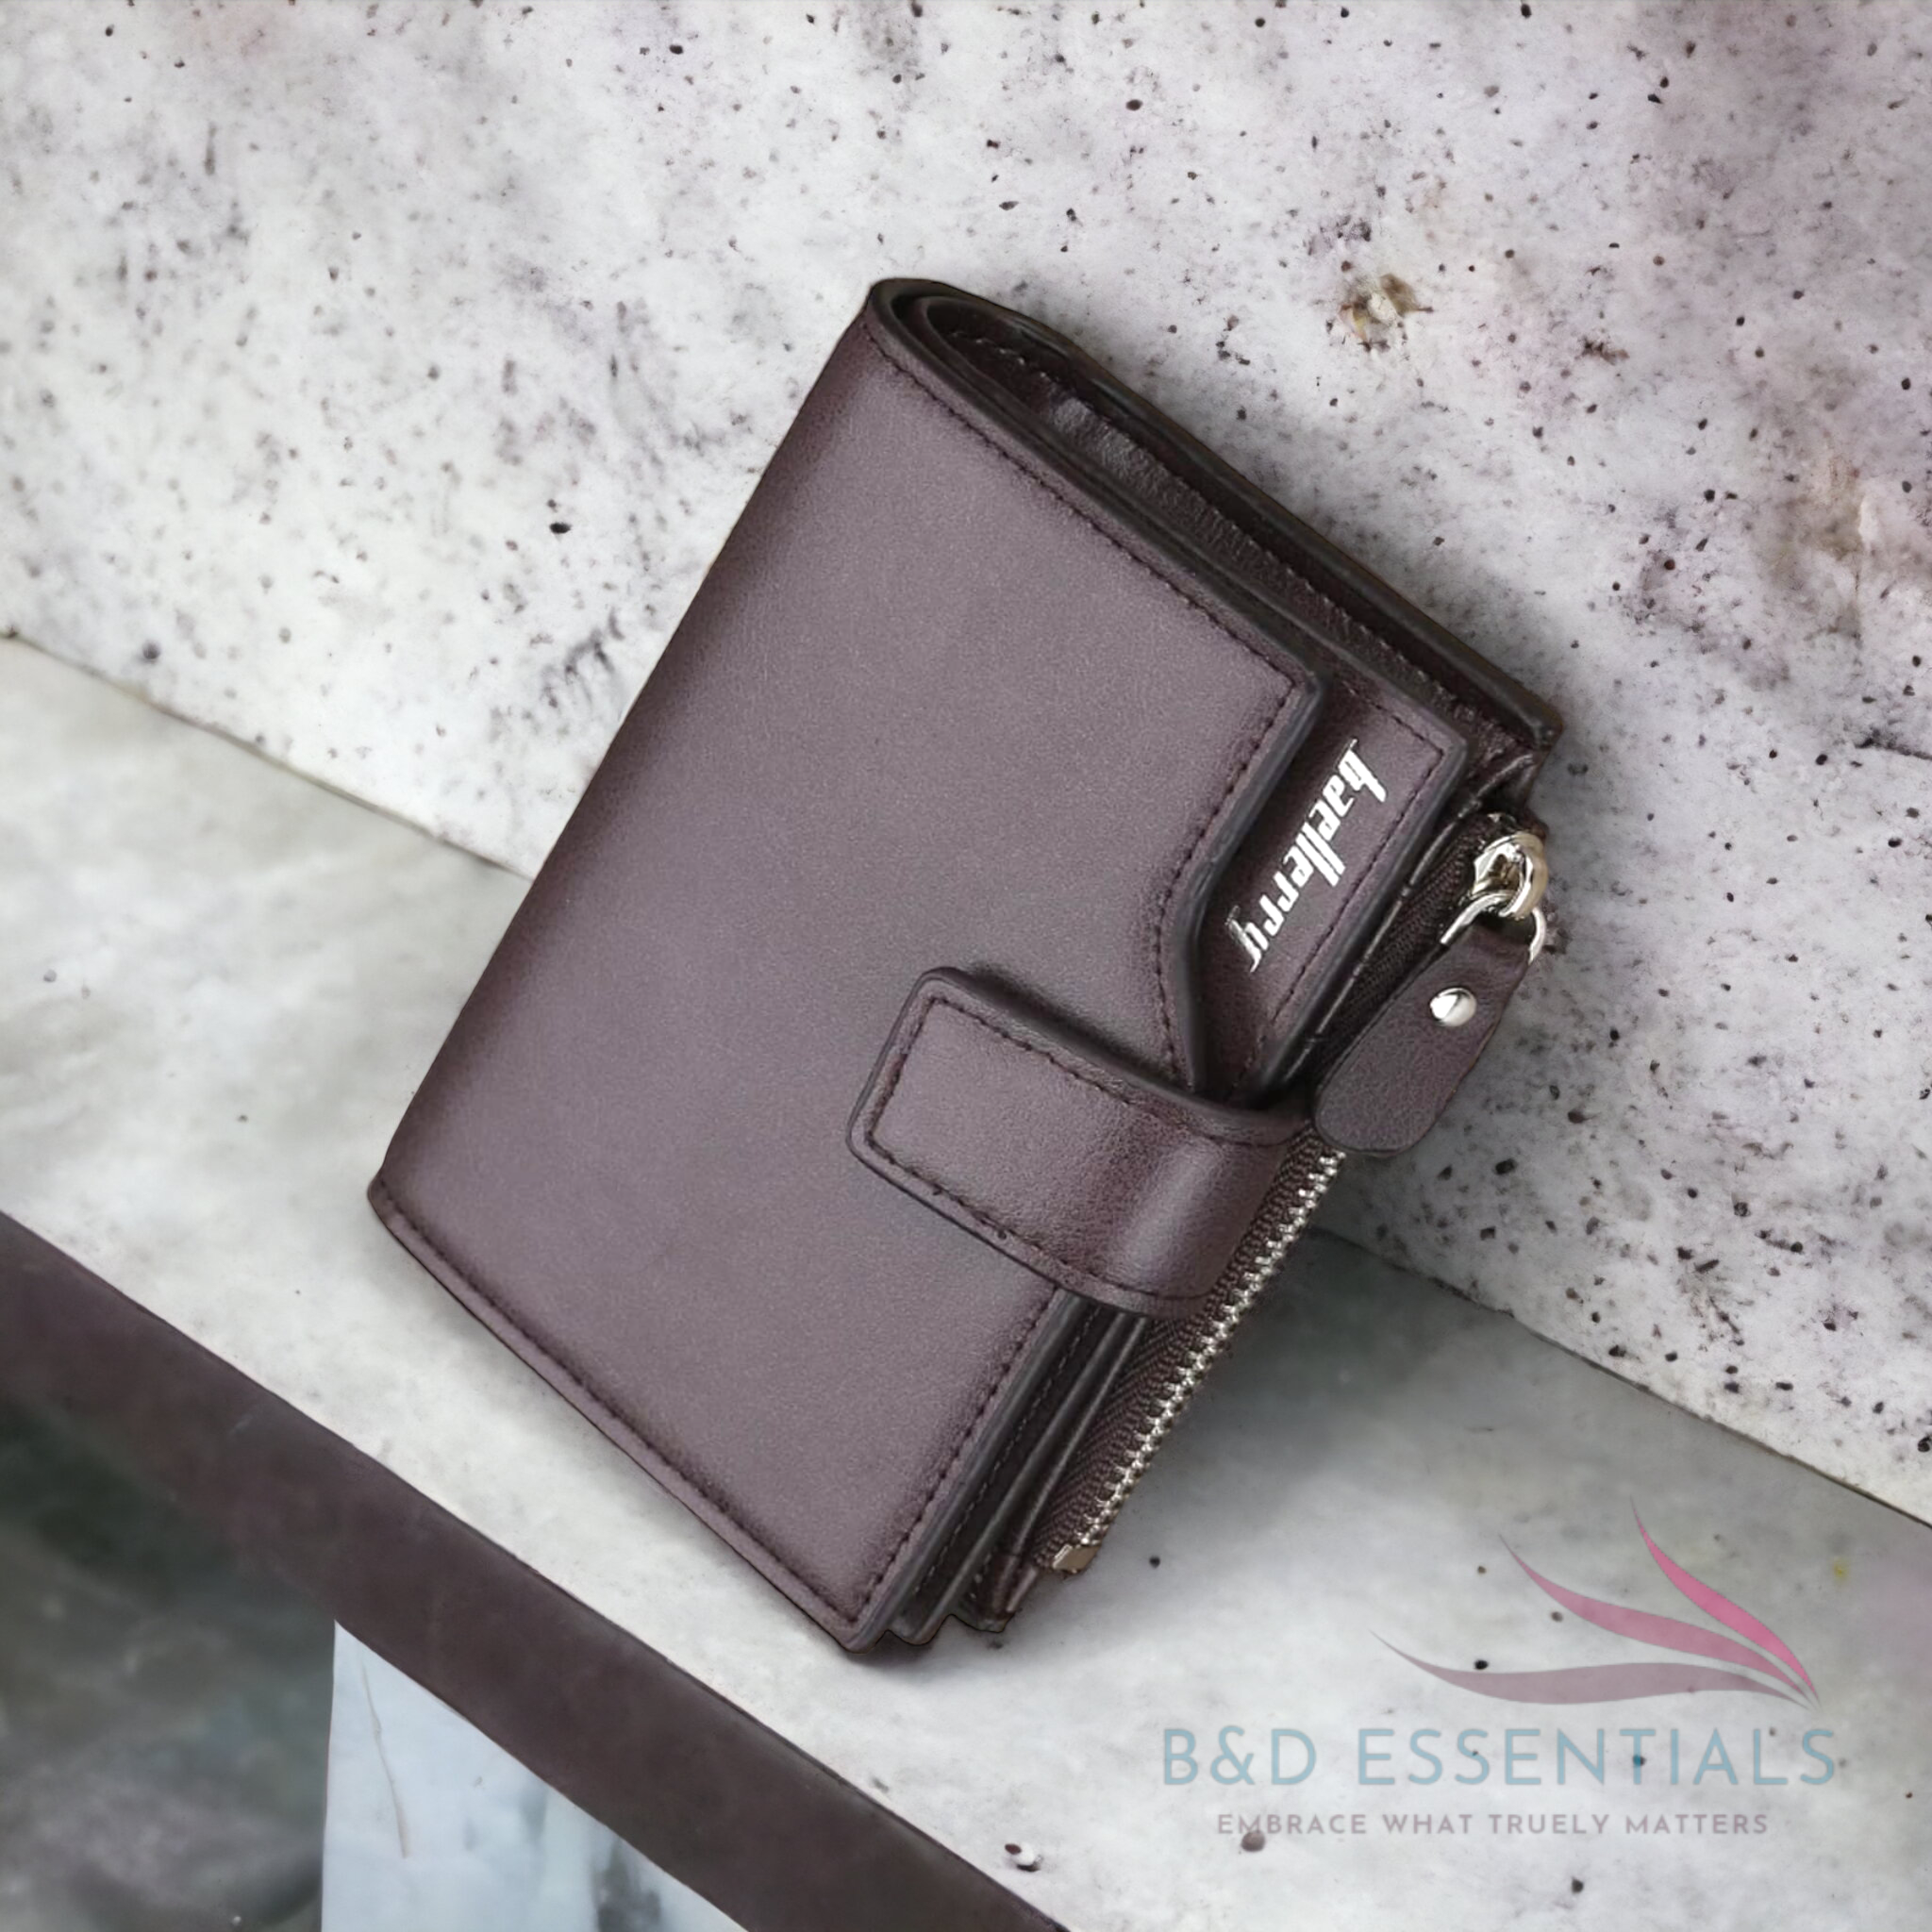 Premium Boweisi Design: Spacious Classic Wallet with High-Quality Card Holder and Bonus Coin Pouch